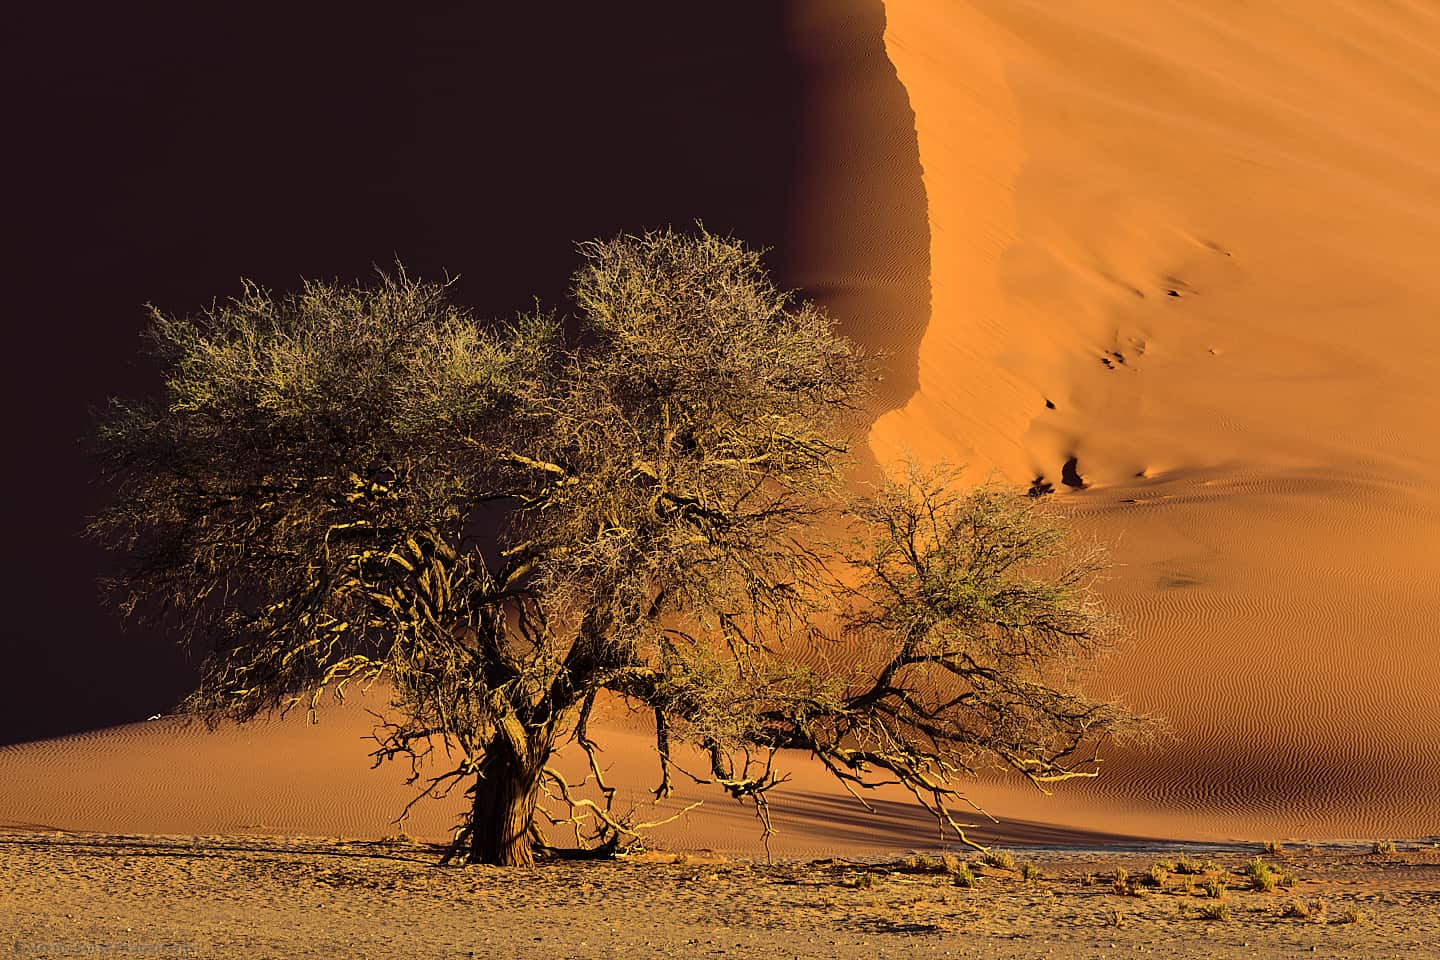 Dune 37 with Camelthorn Tree